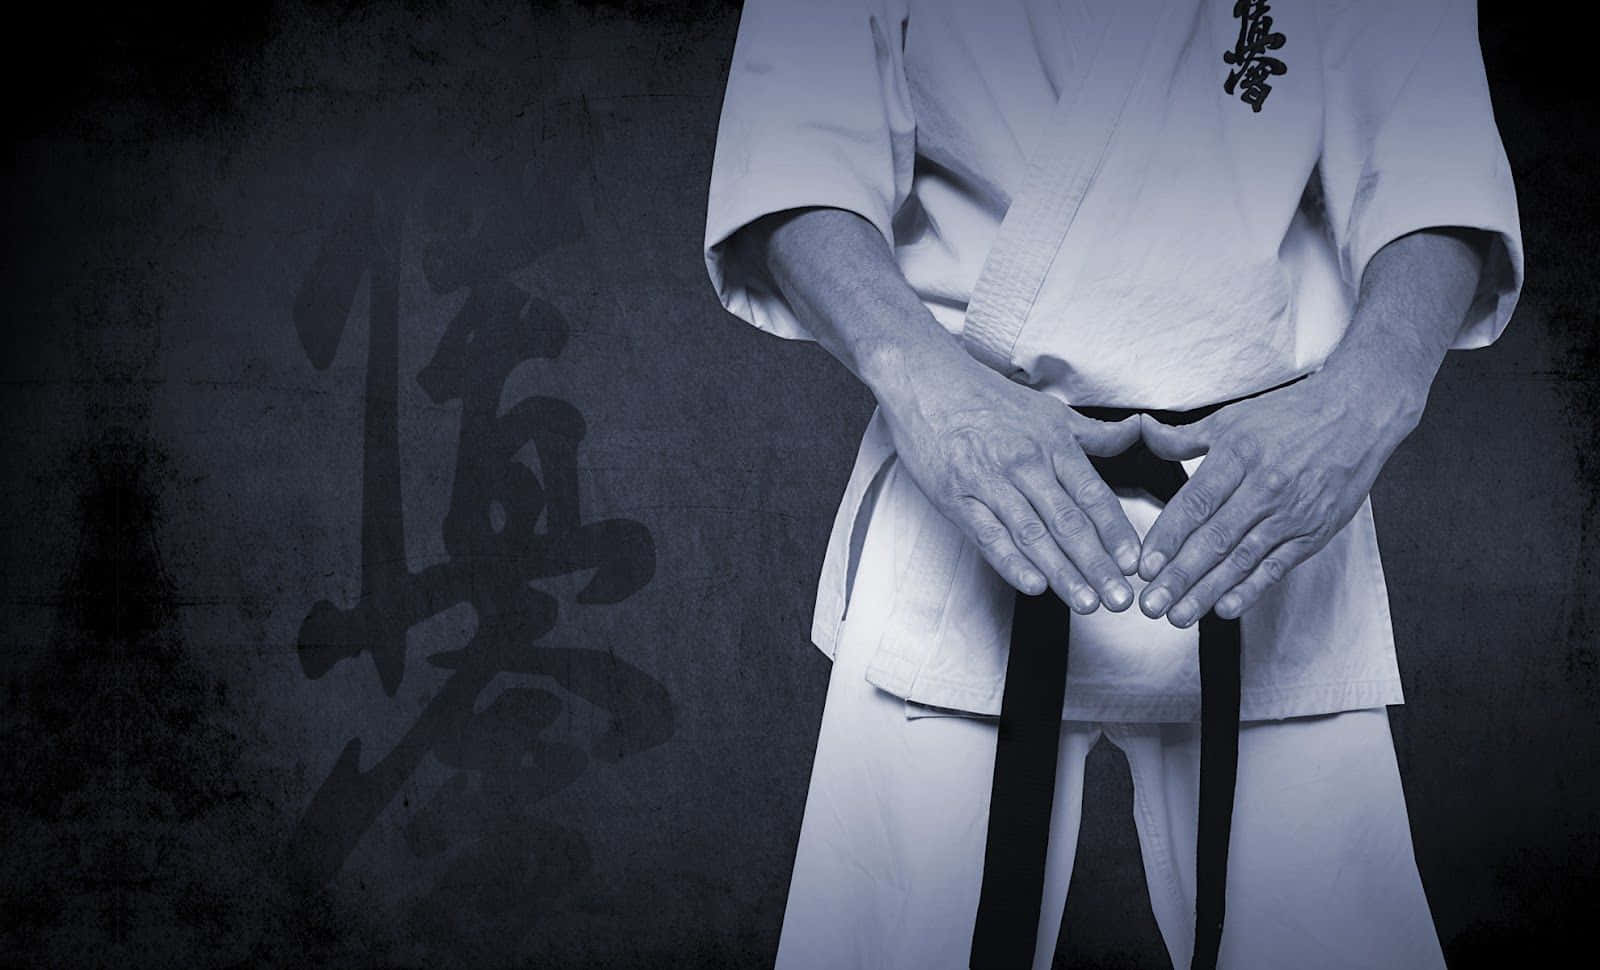 A Man In A Karate Uniform Holding His Hands Up